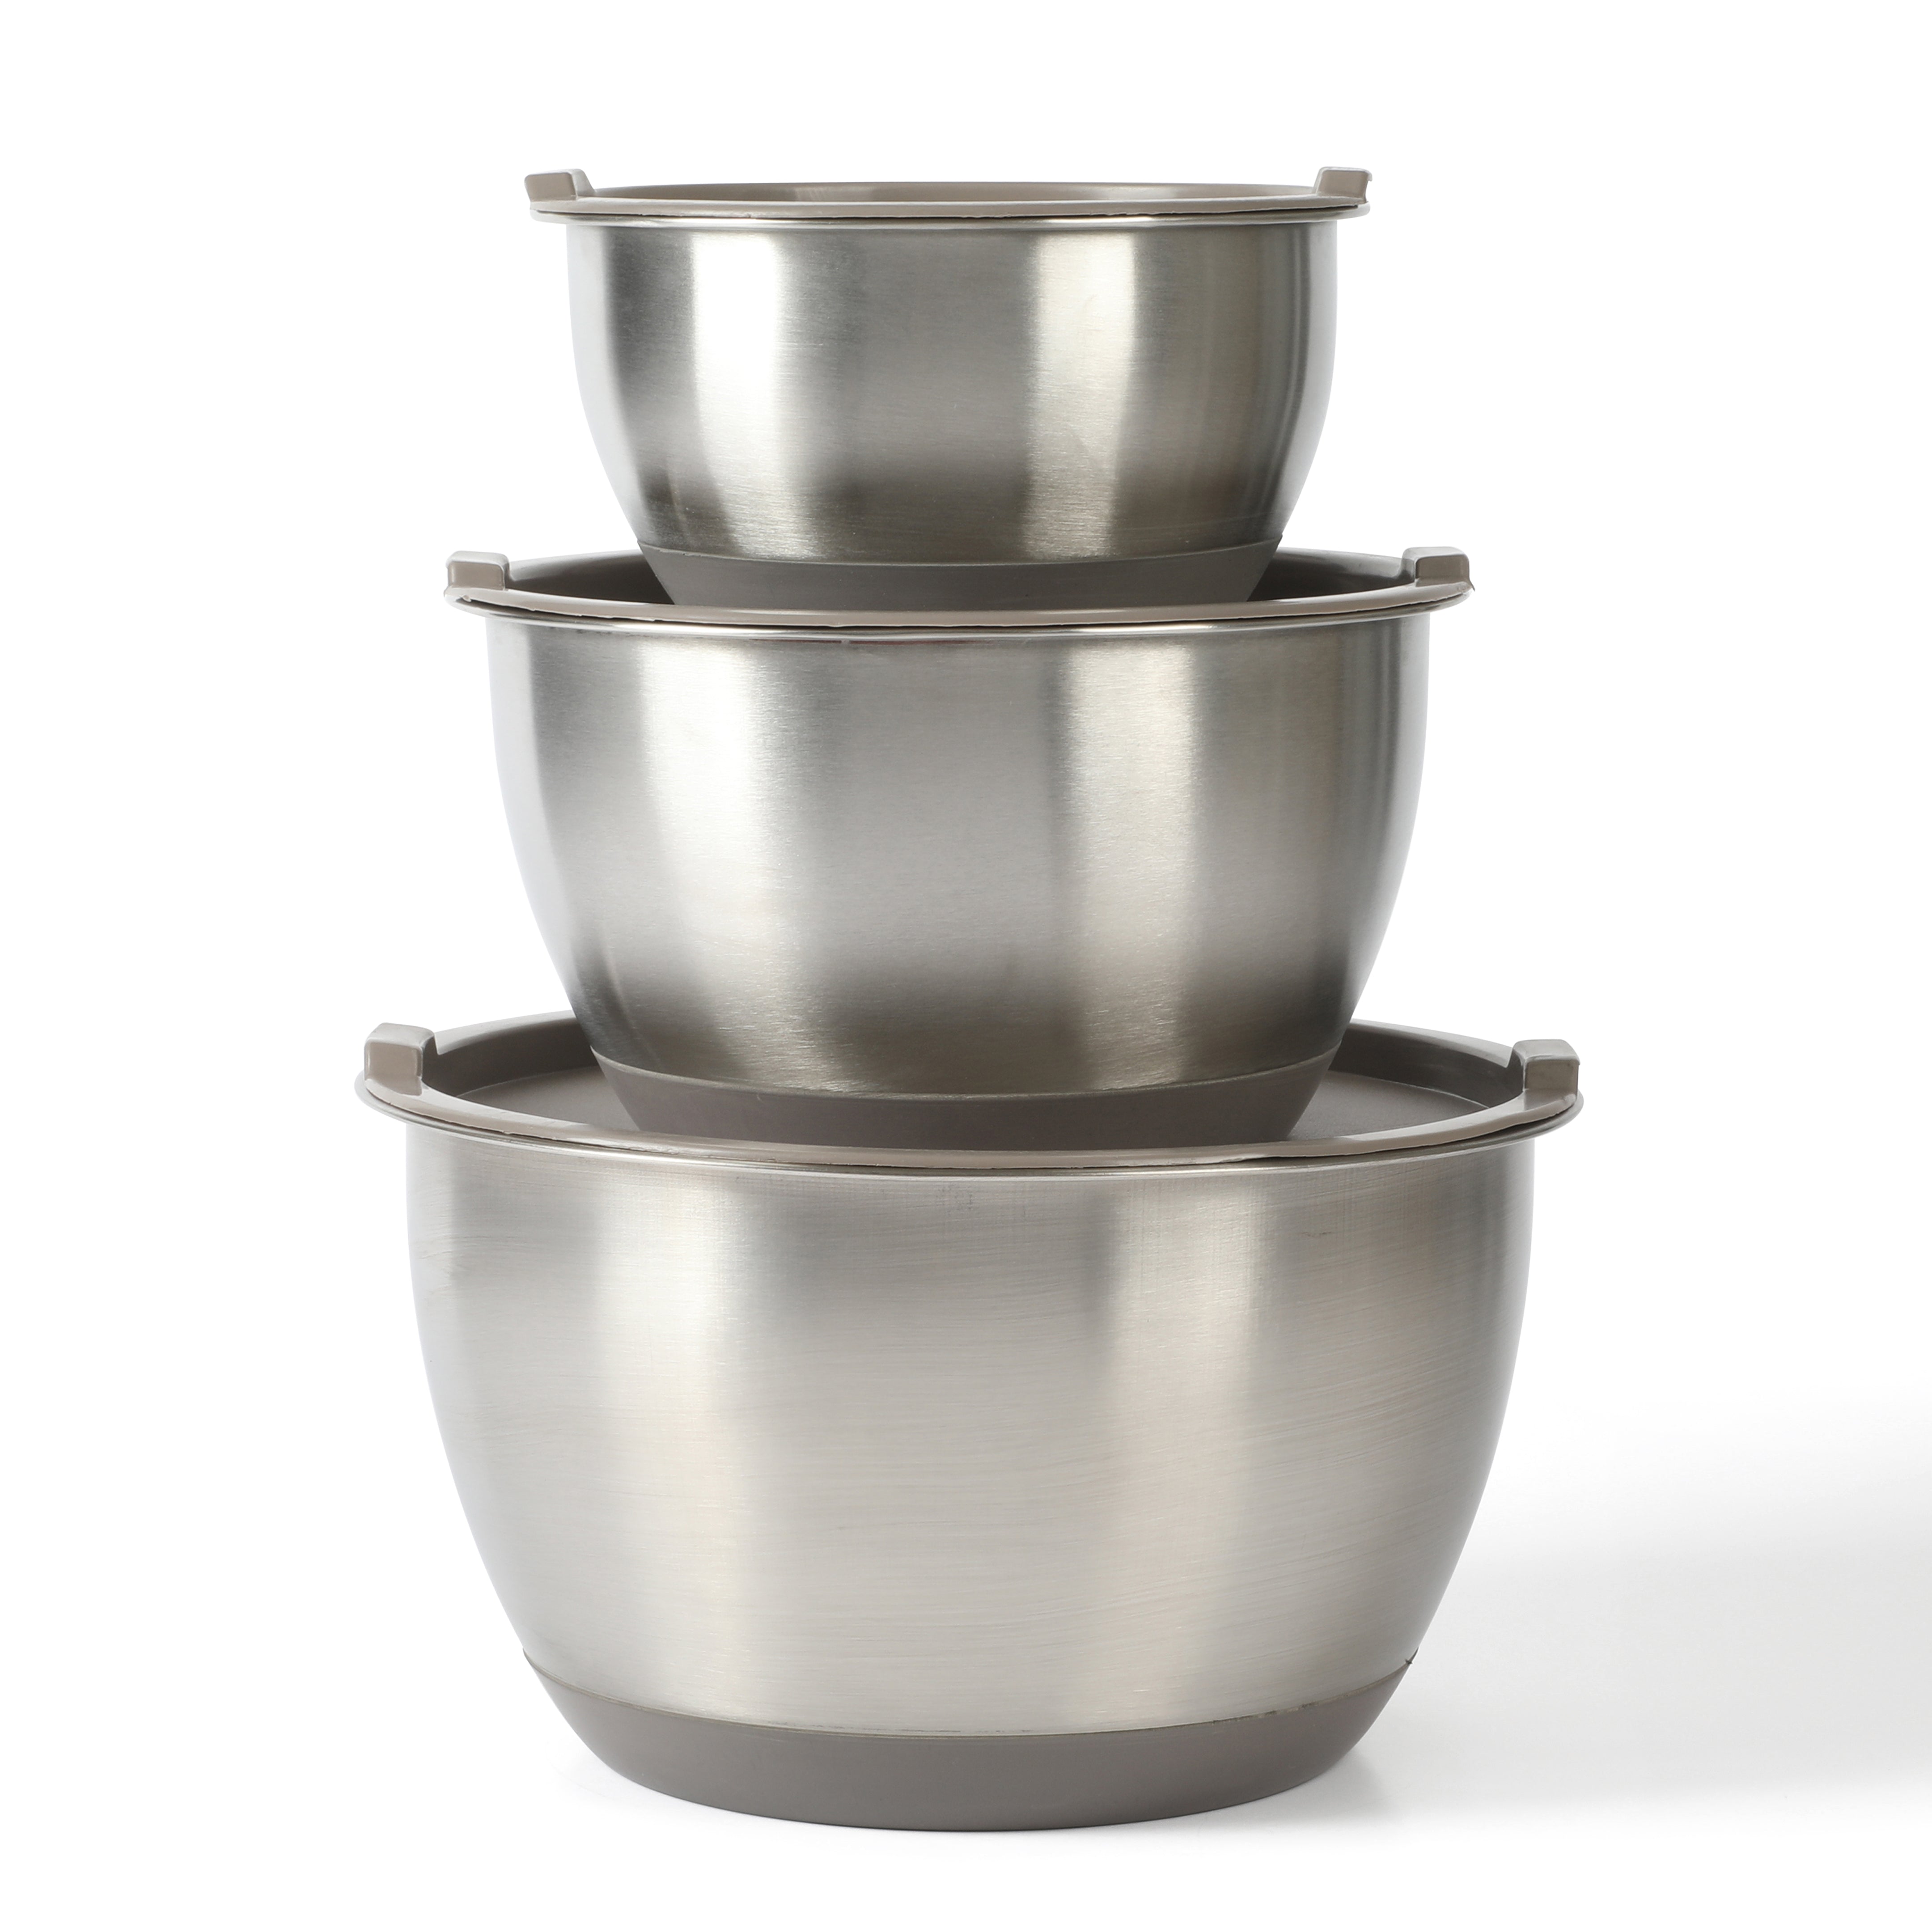 20 Pcs Stainless Steel Mixing Bowls Set with Airtight Lids